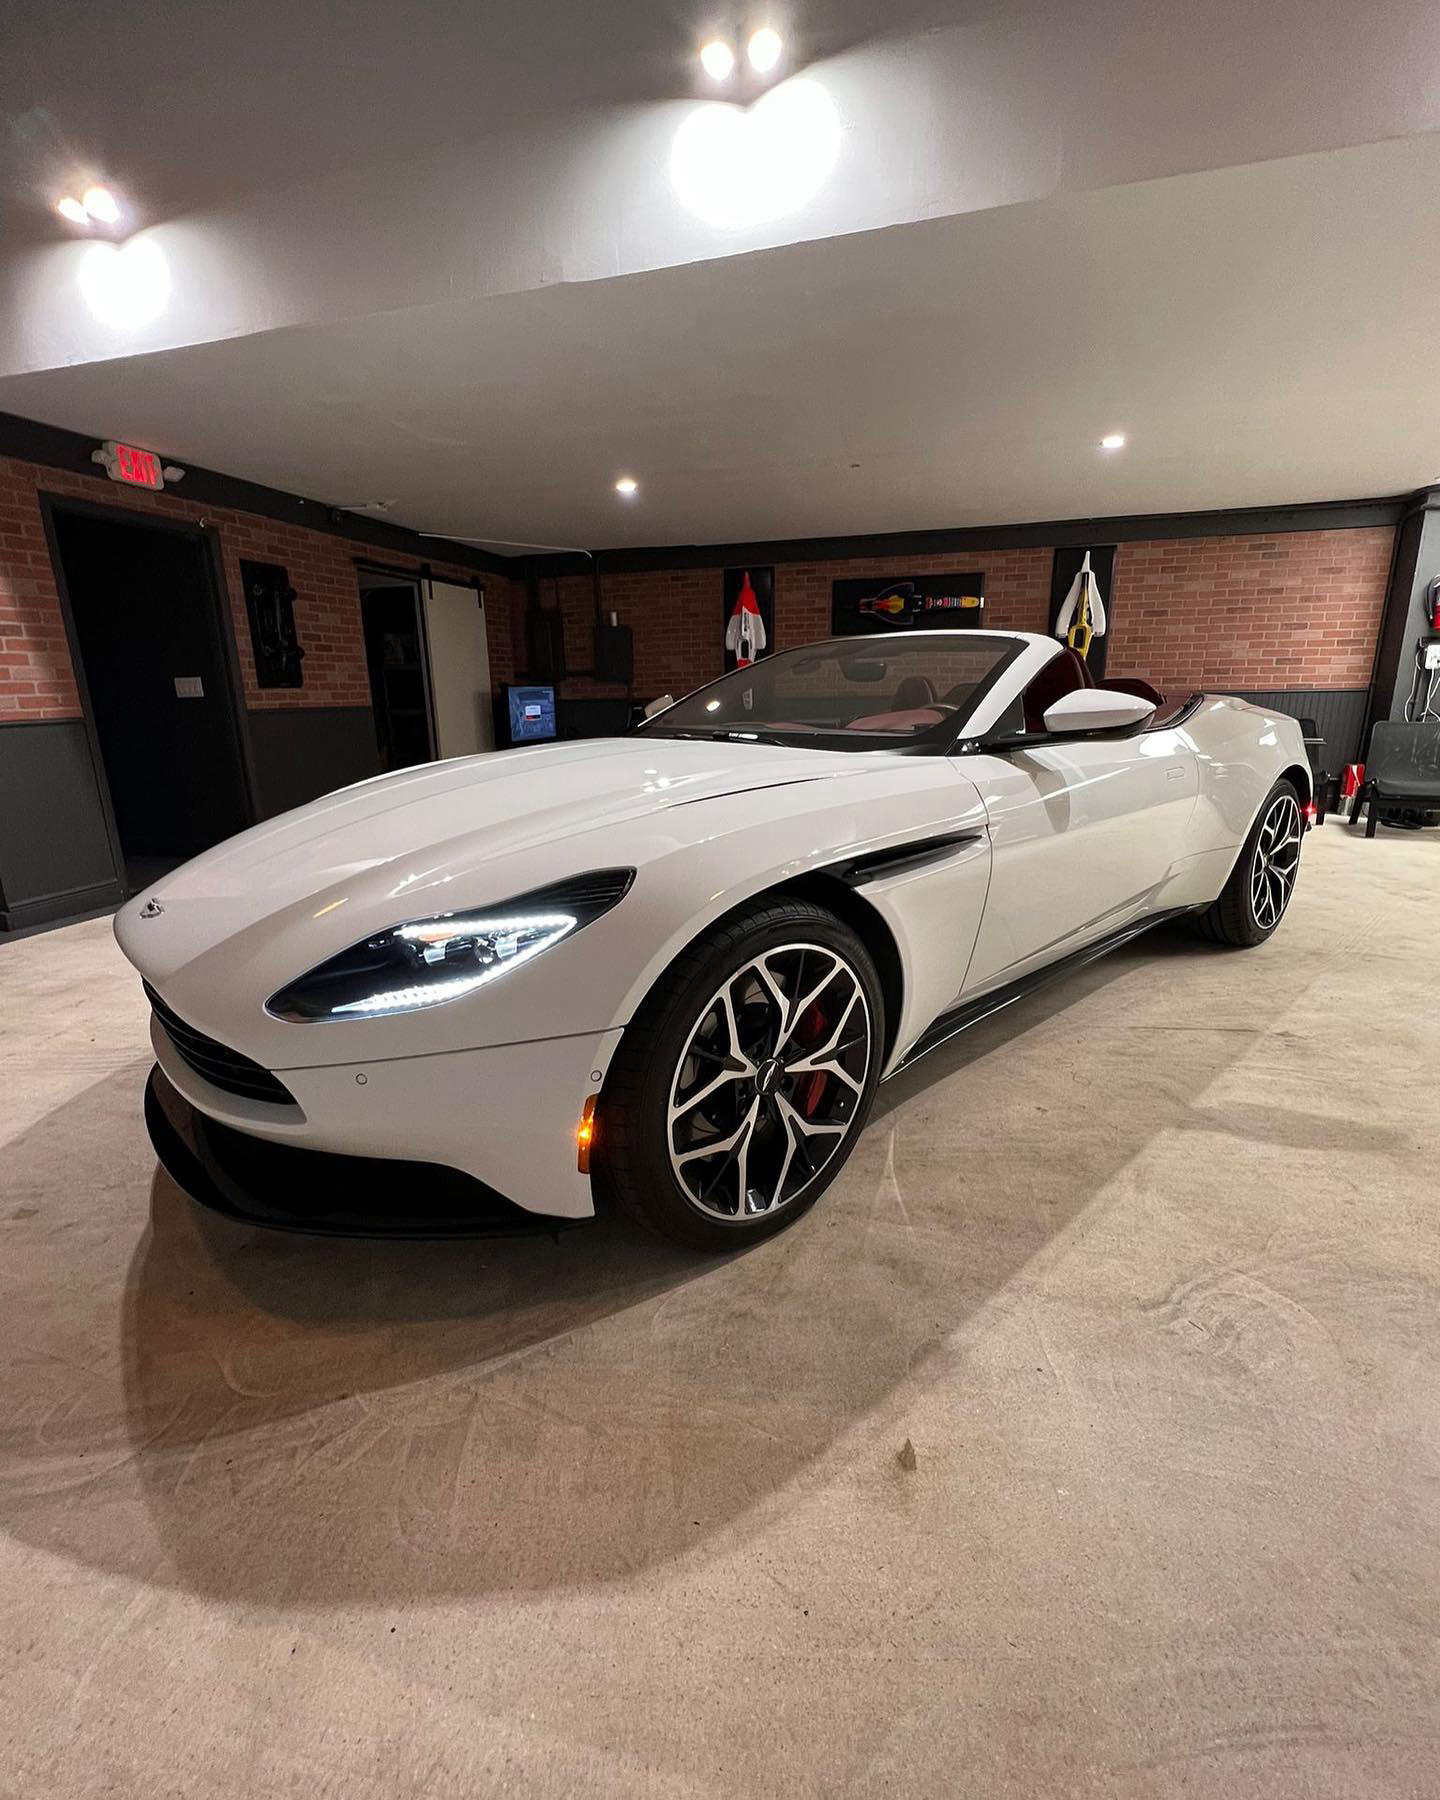 image  1 Prime Miami - ASTON MARTIN DB11 BRAND NEW AVAILABLE FOR RENT